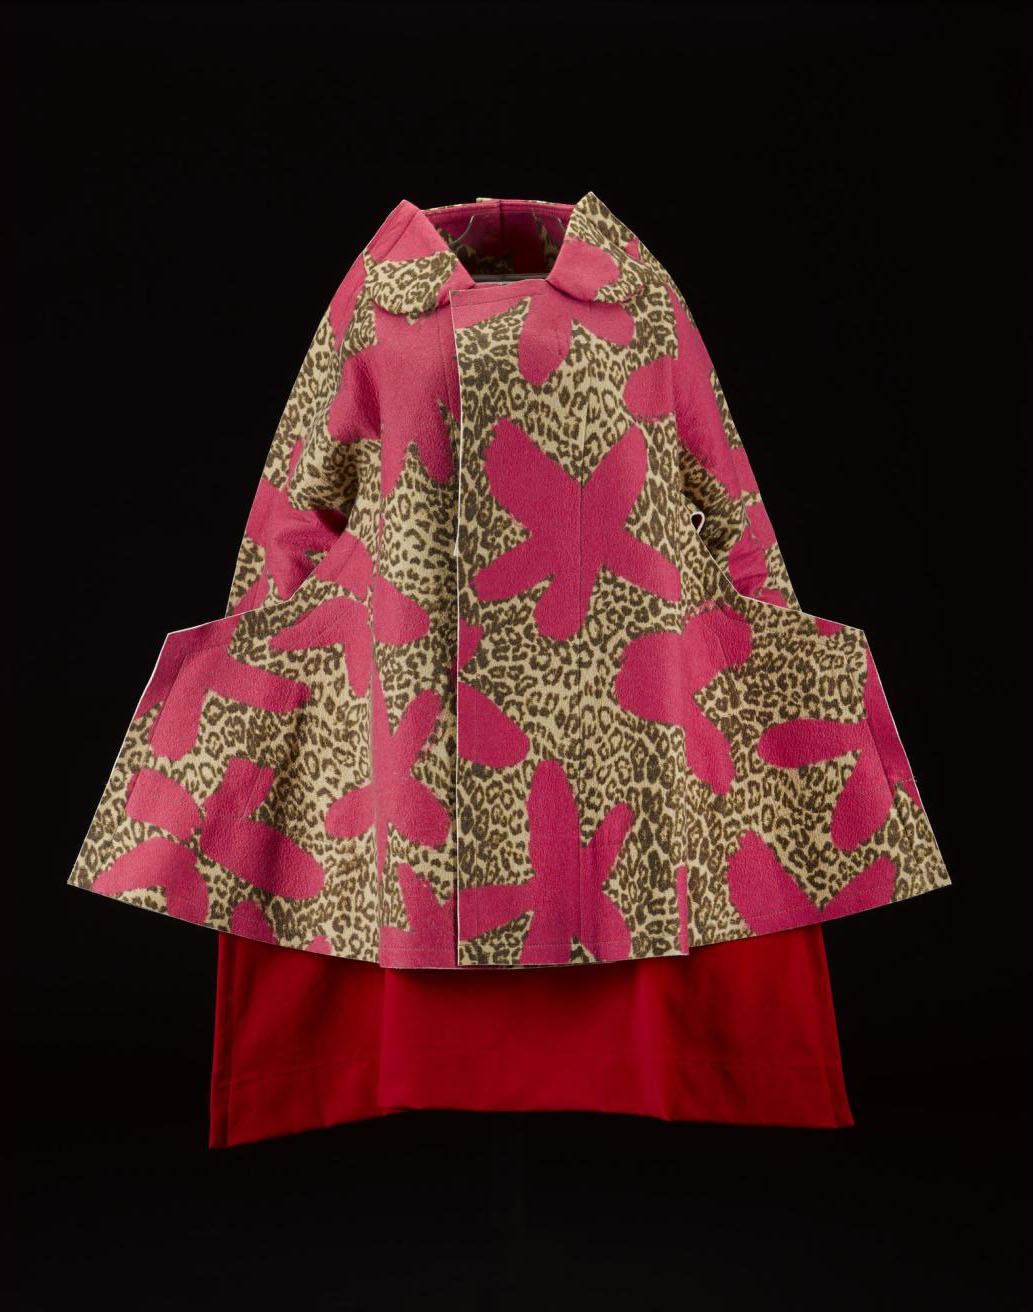 Woman's coat or jacket, felted wool in bright pink floret and leopard print, with angular shaped hips, from the Commes des Garcons, 'Flat' or '2D' collection, Autumn-Winter 2012, designed by Rei Kawakubo. On display in the Fashion and Style gallery.